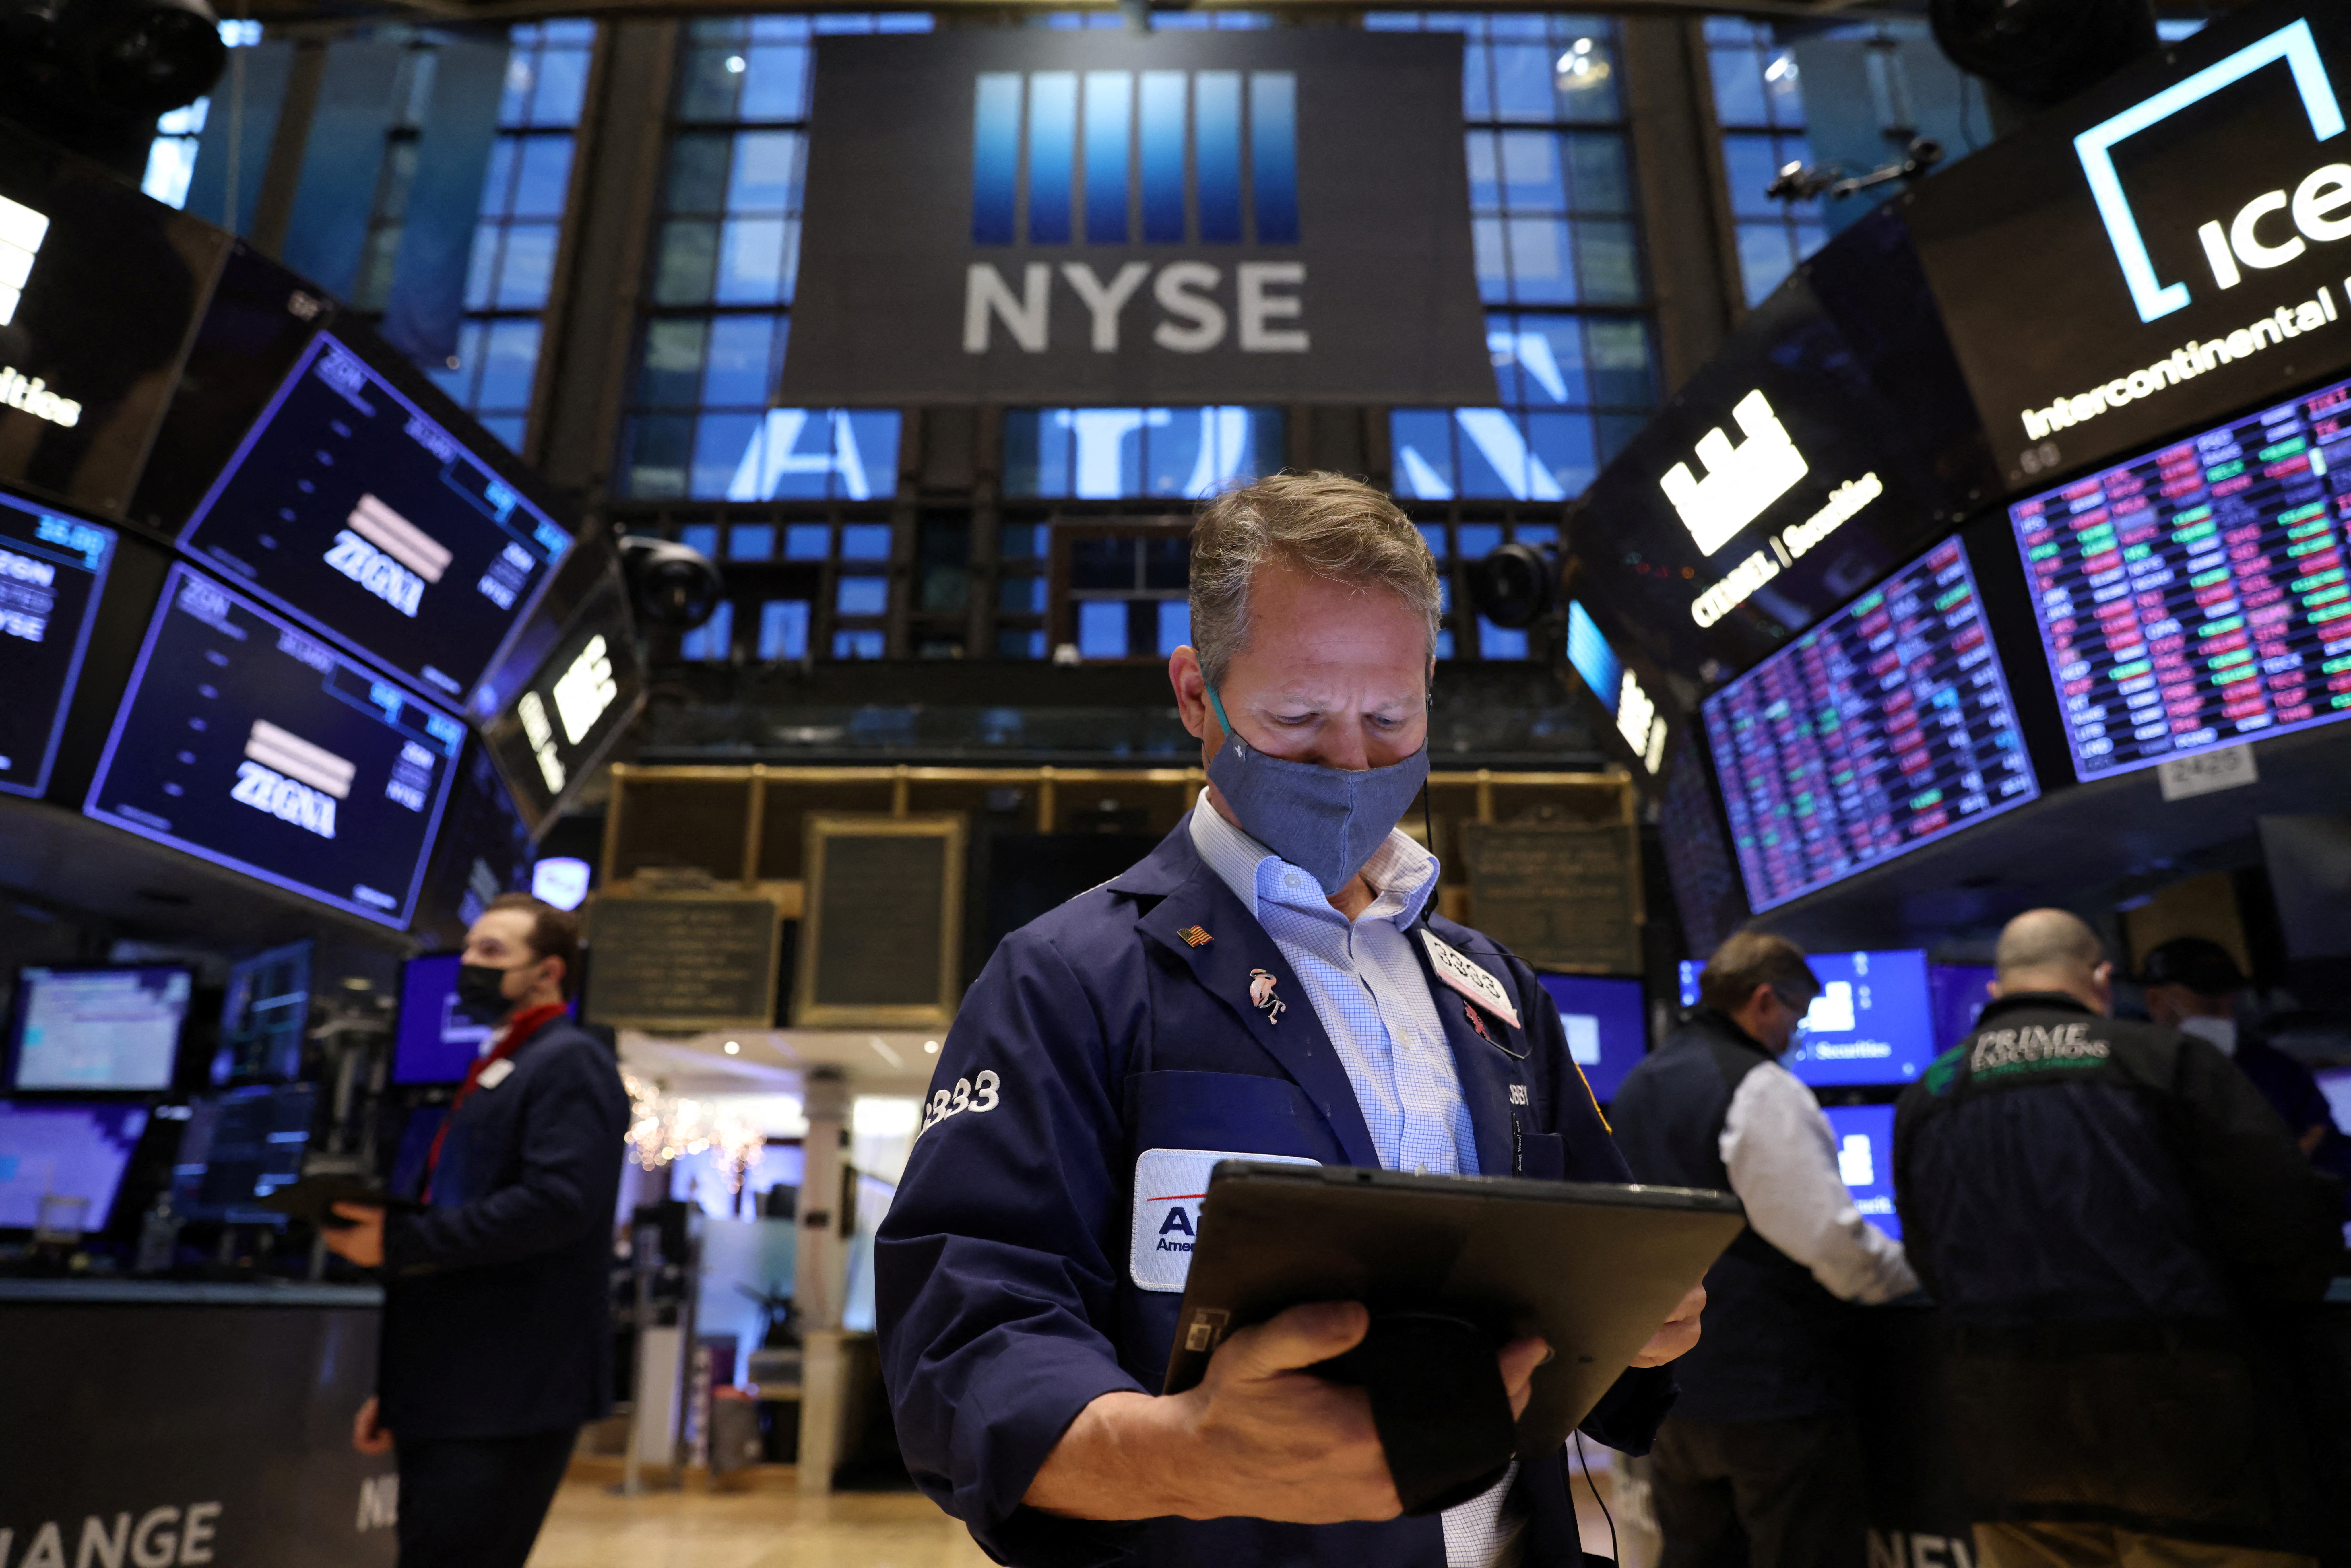 A trader in a face mask works on the trading floor at the New York Stock Exchange (NYSE) in New York City